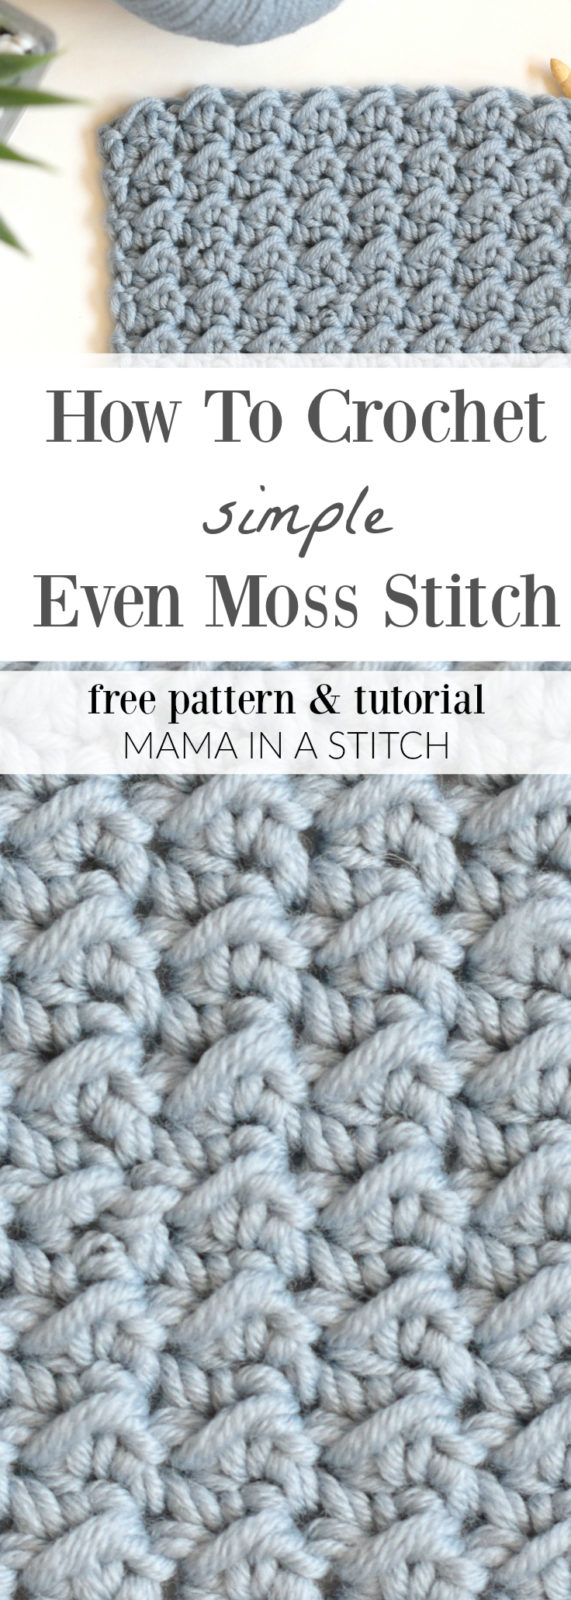 How To Crochet the Even Moss Stitch